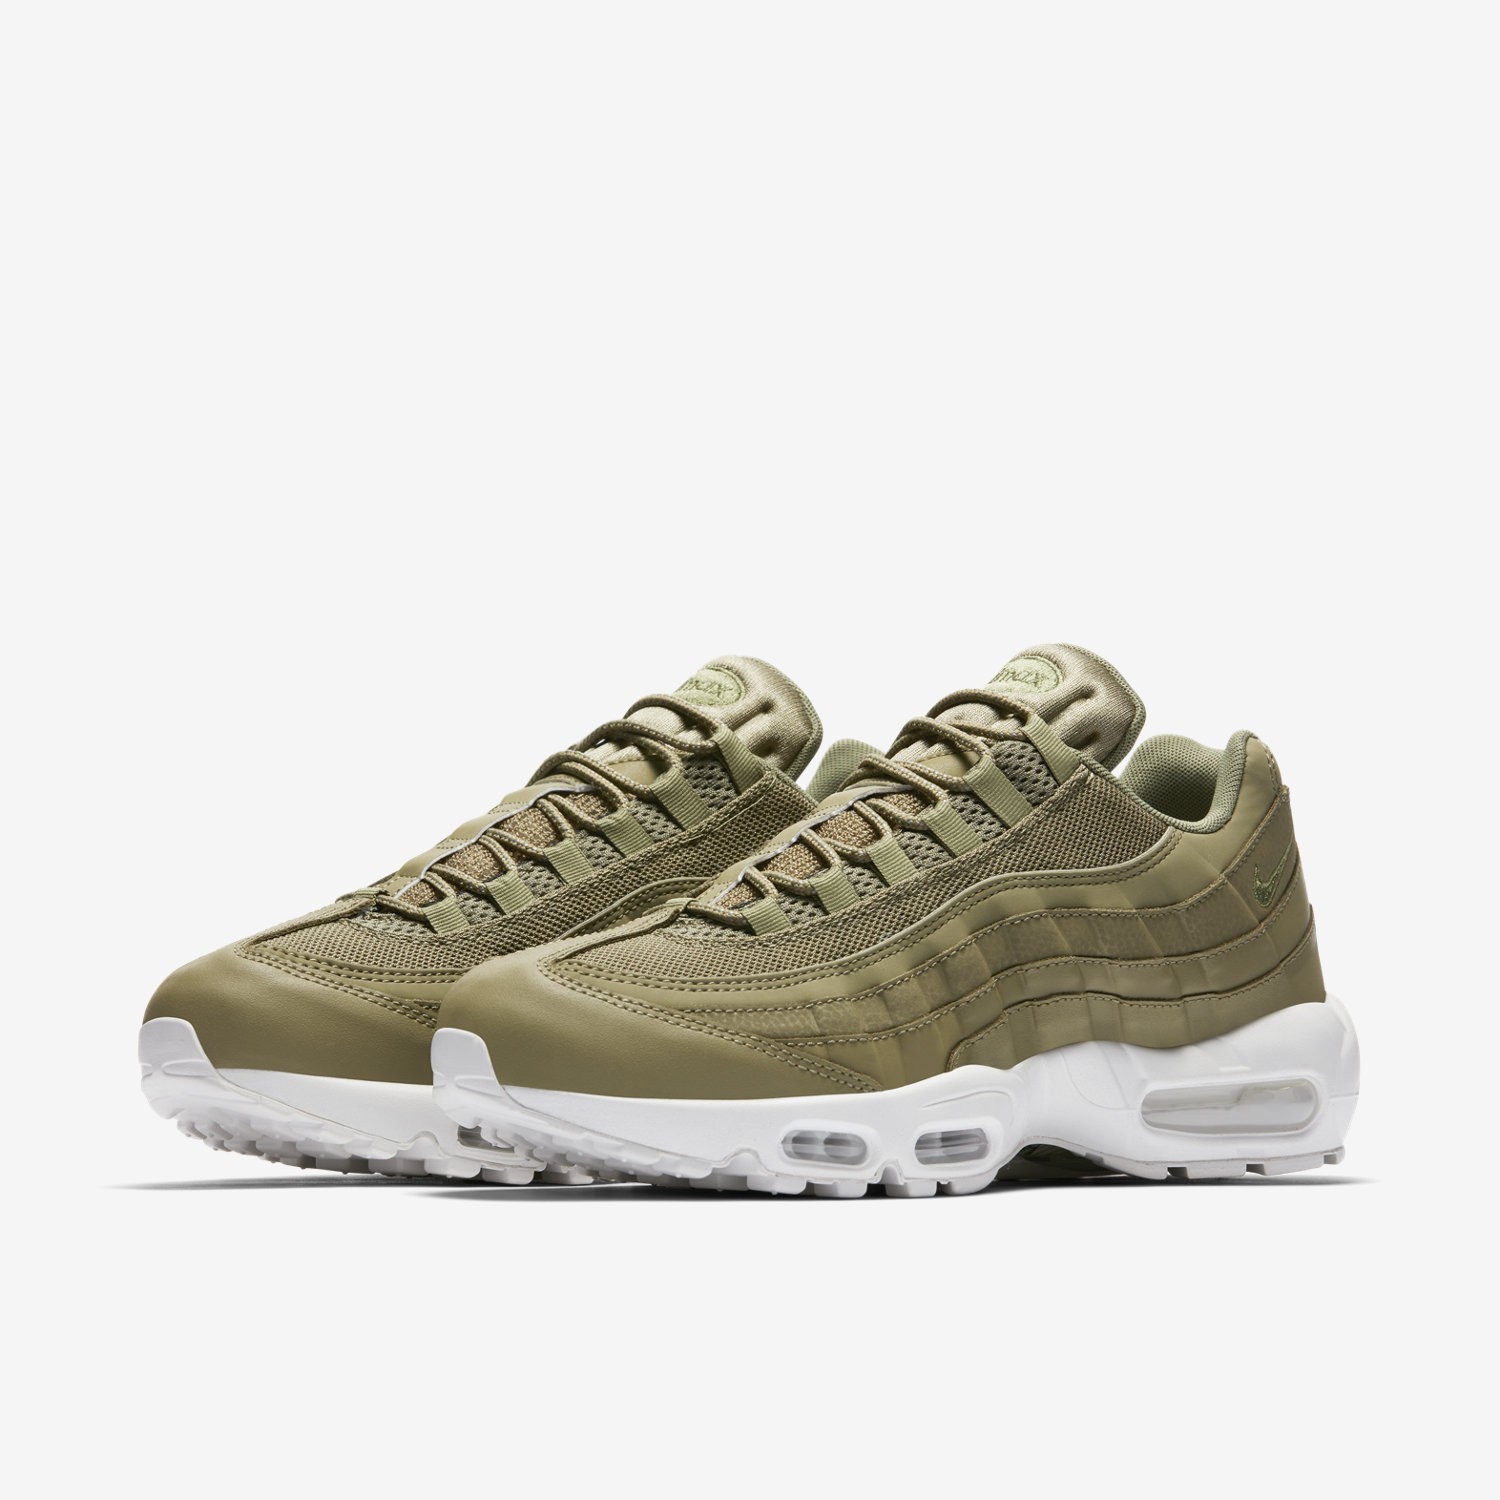 nike air max 95 femme grise soldes